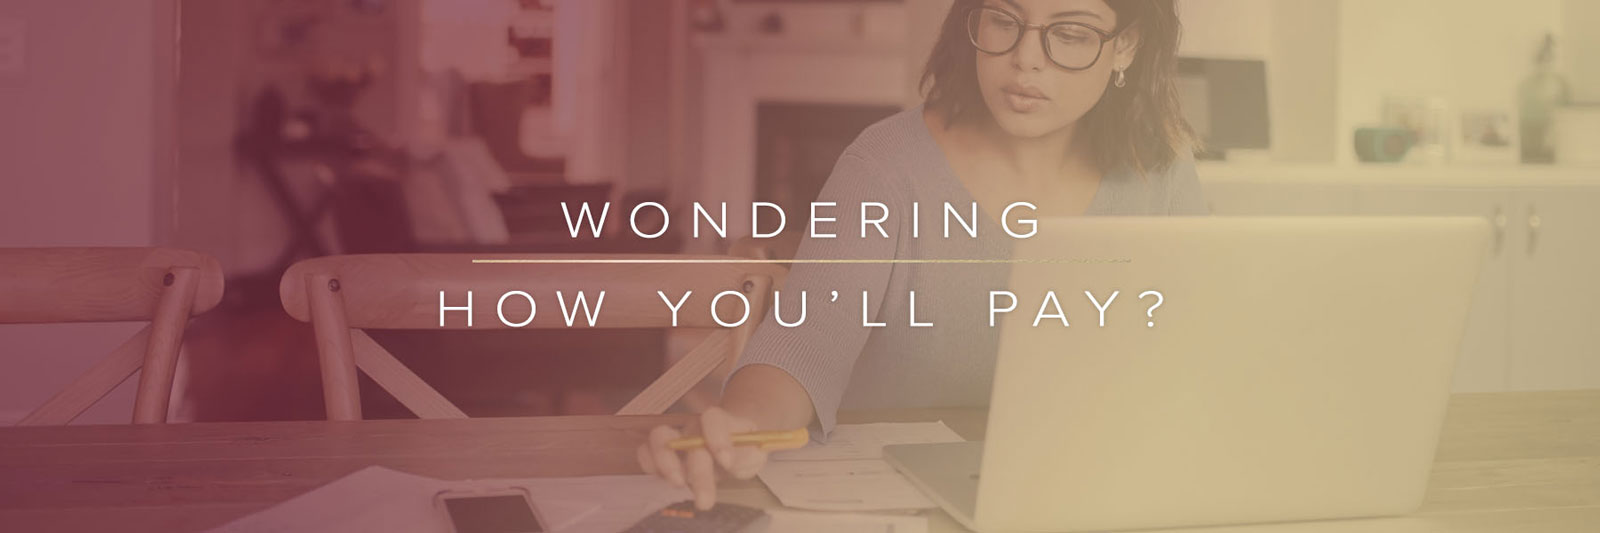 wondering how you'll pay?